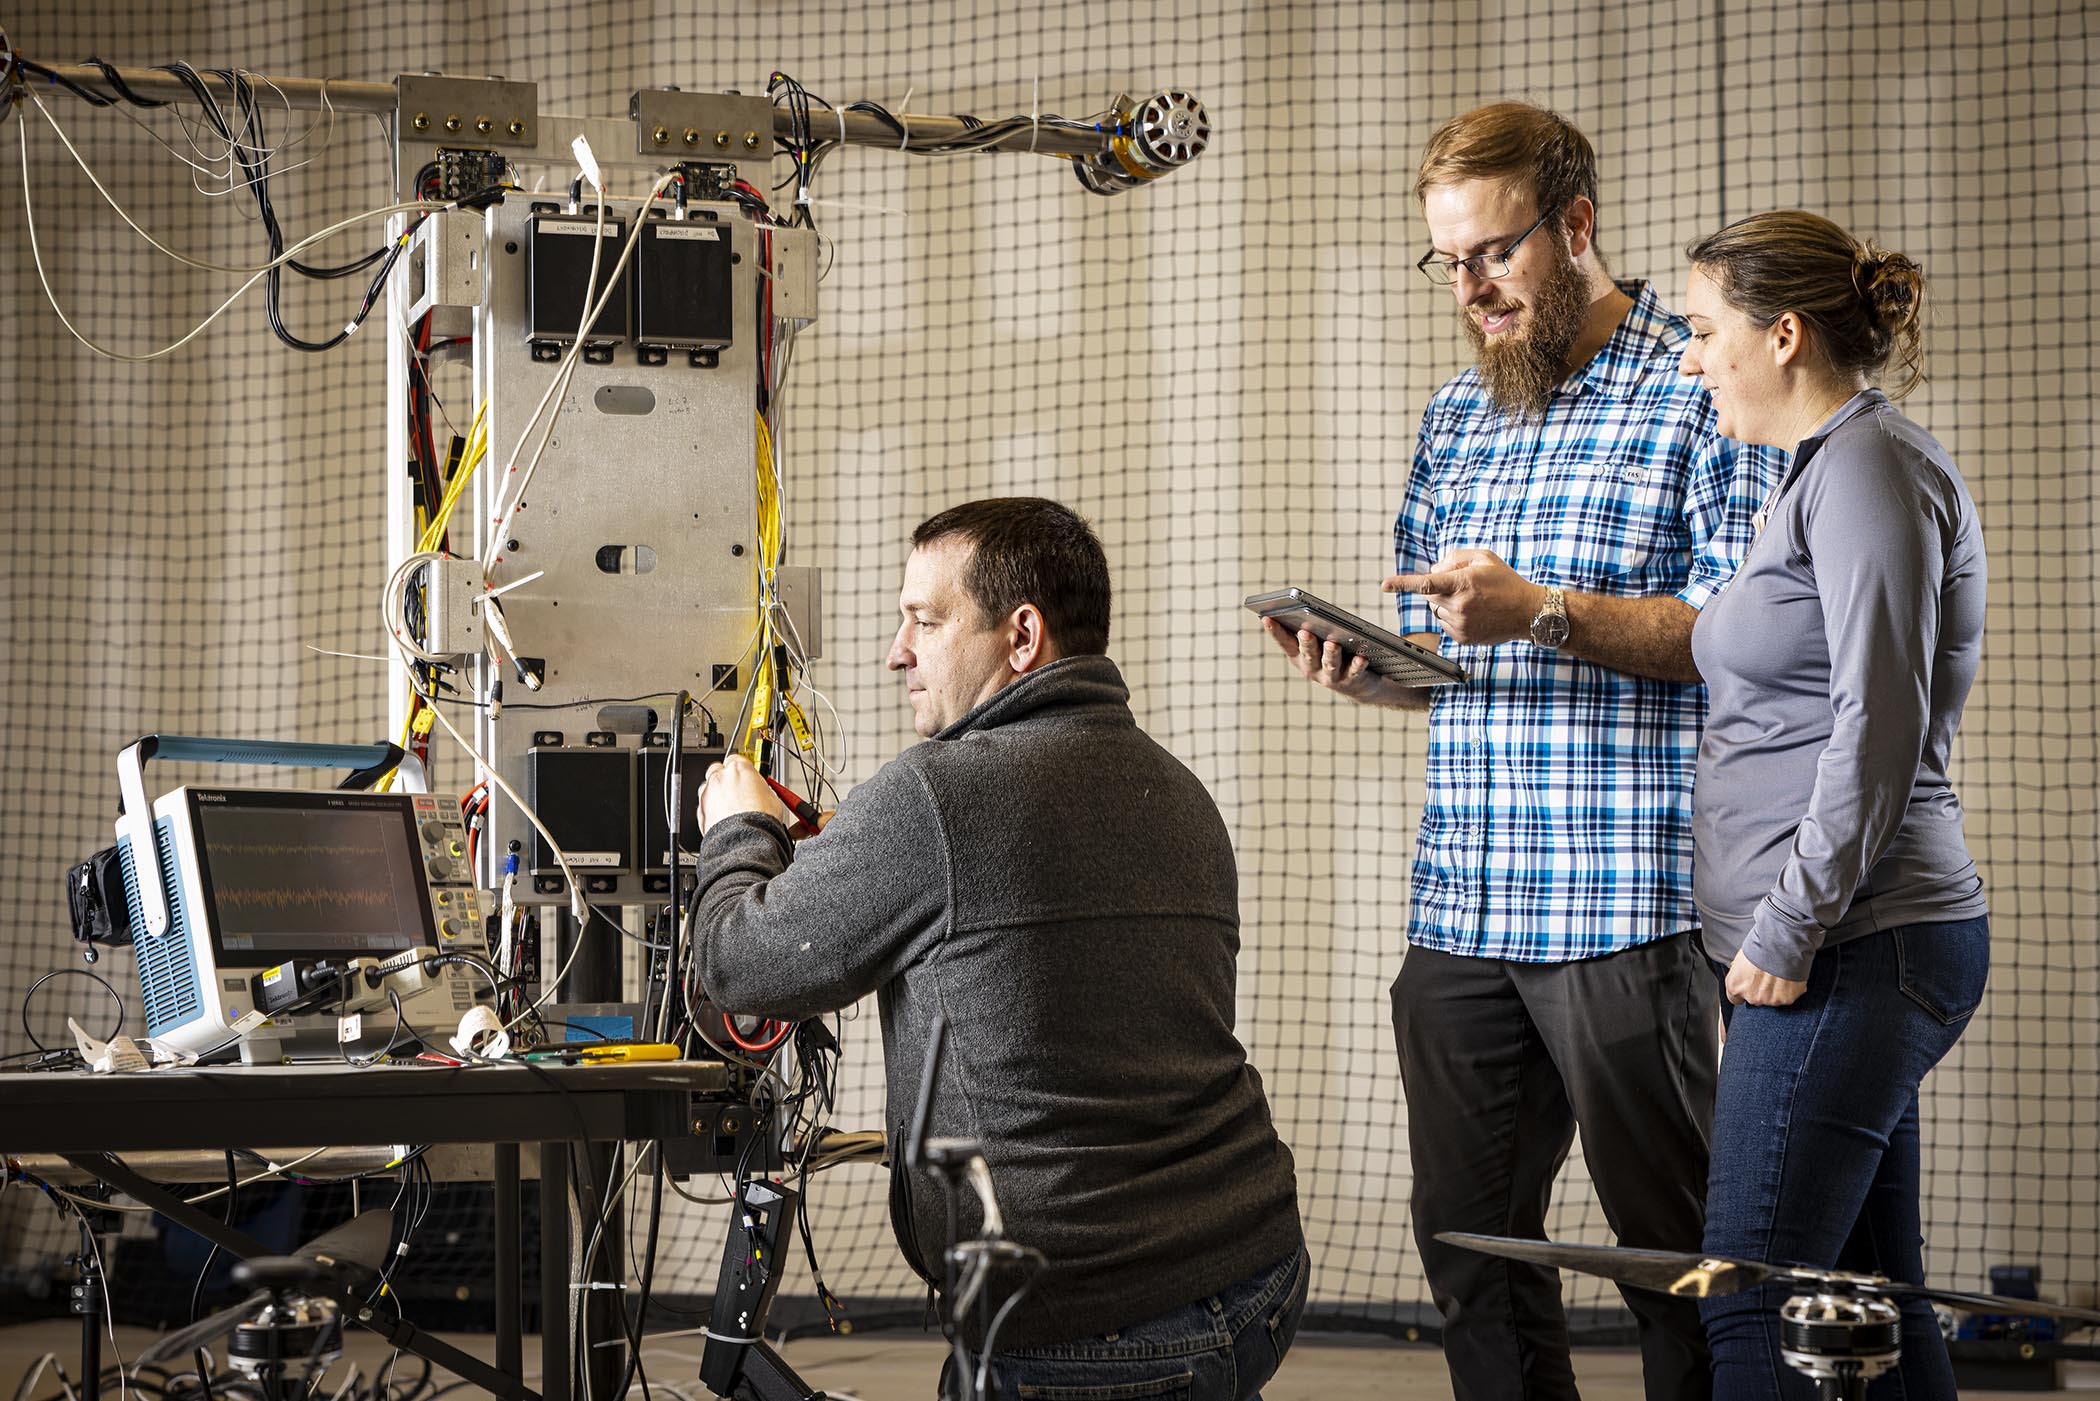 Engineers (from left) John Samsock, Anthony Drewicz and Stephanie Lepchenske work with a test platform in the Dragonfly Flight Lab